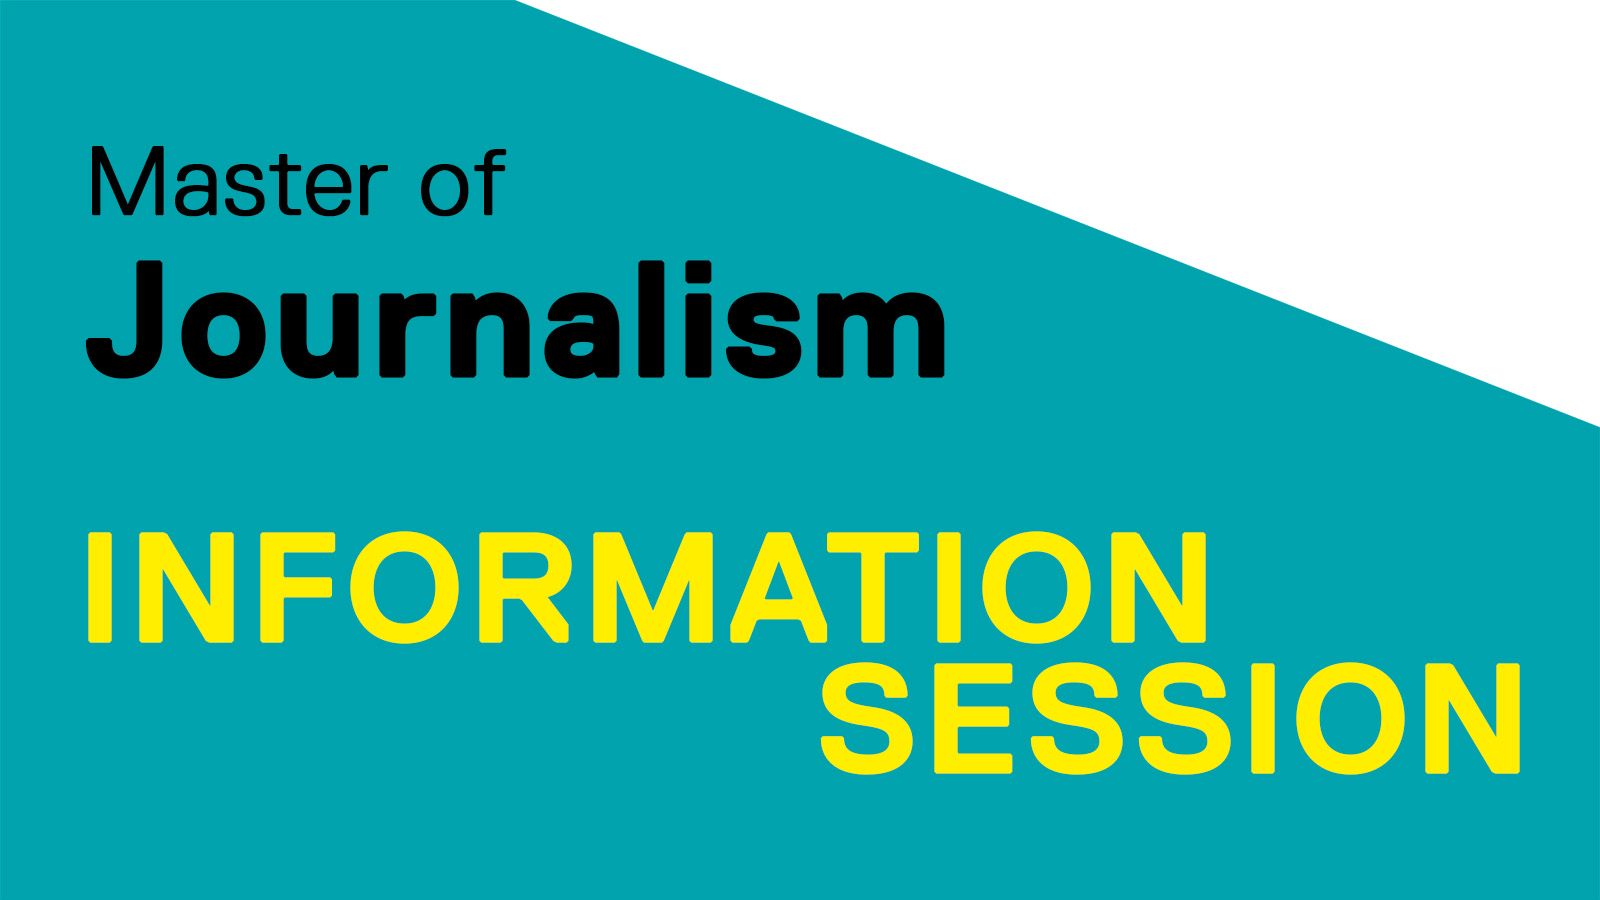 On a blue background in blue text "Master of Journalism" and below in yellow text "Information Session."